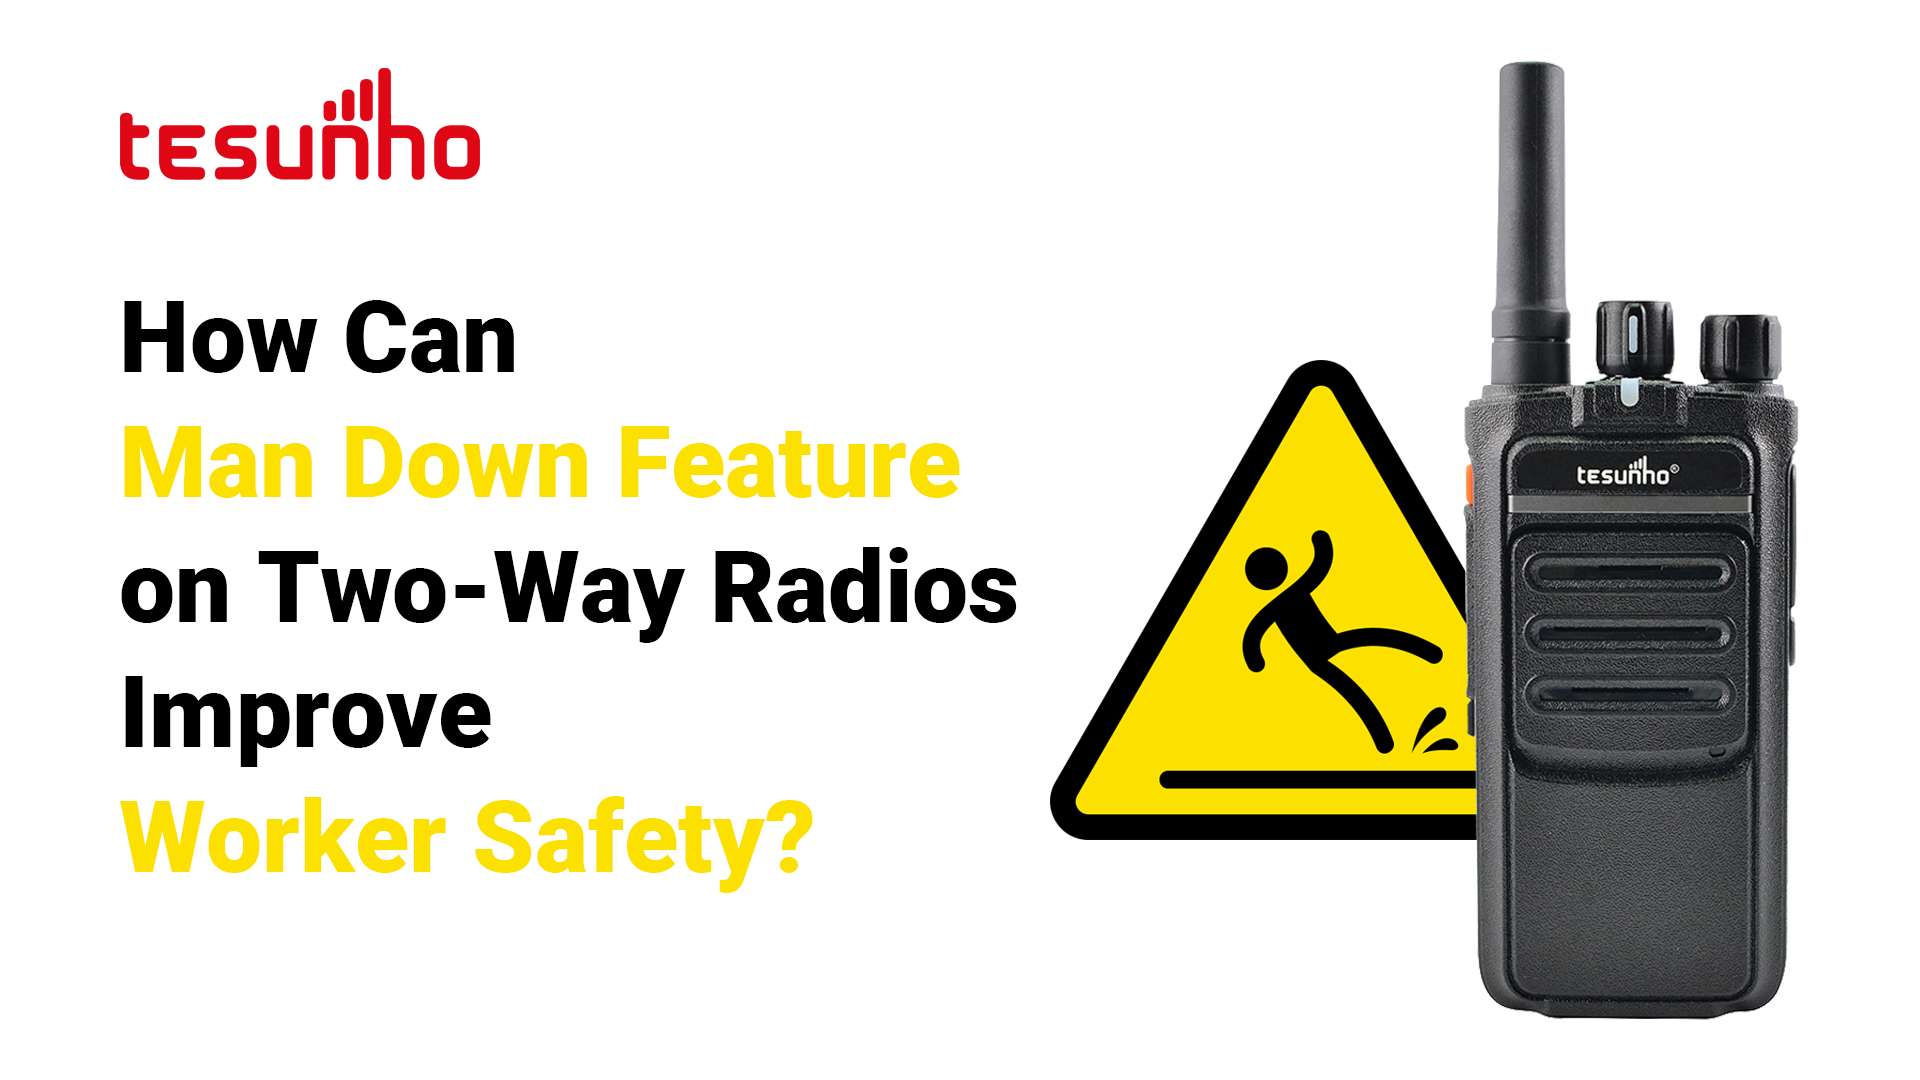 How Can Man Down Feature on Two-Way Radios Improve Worker Safety?